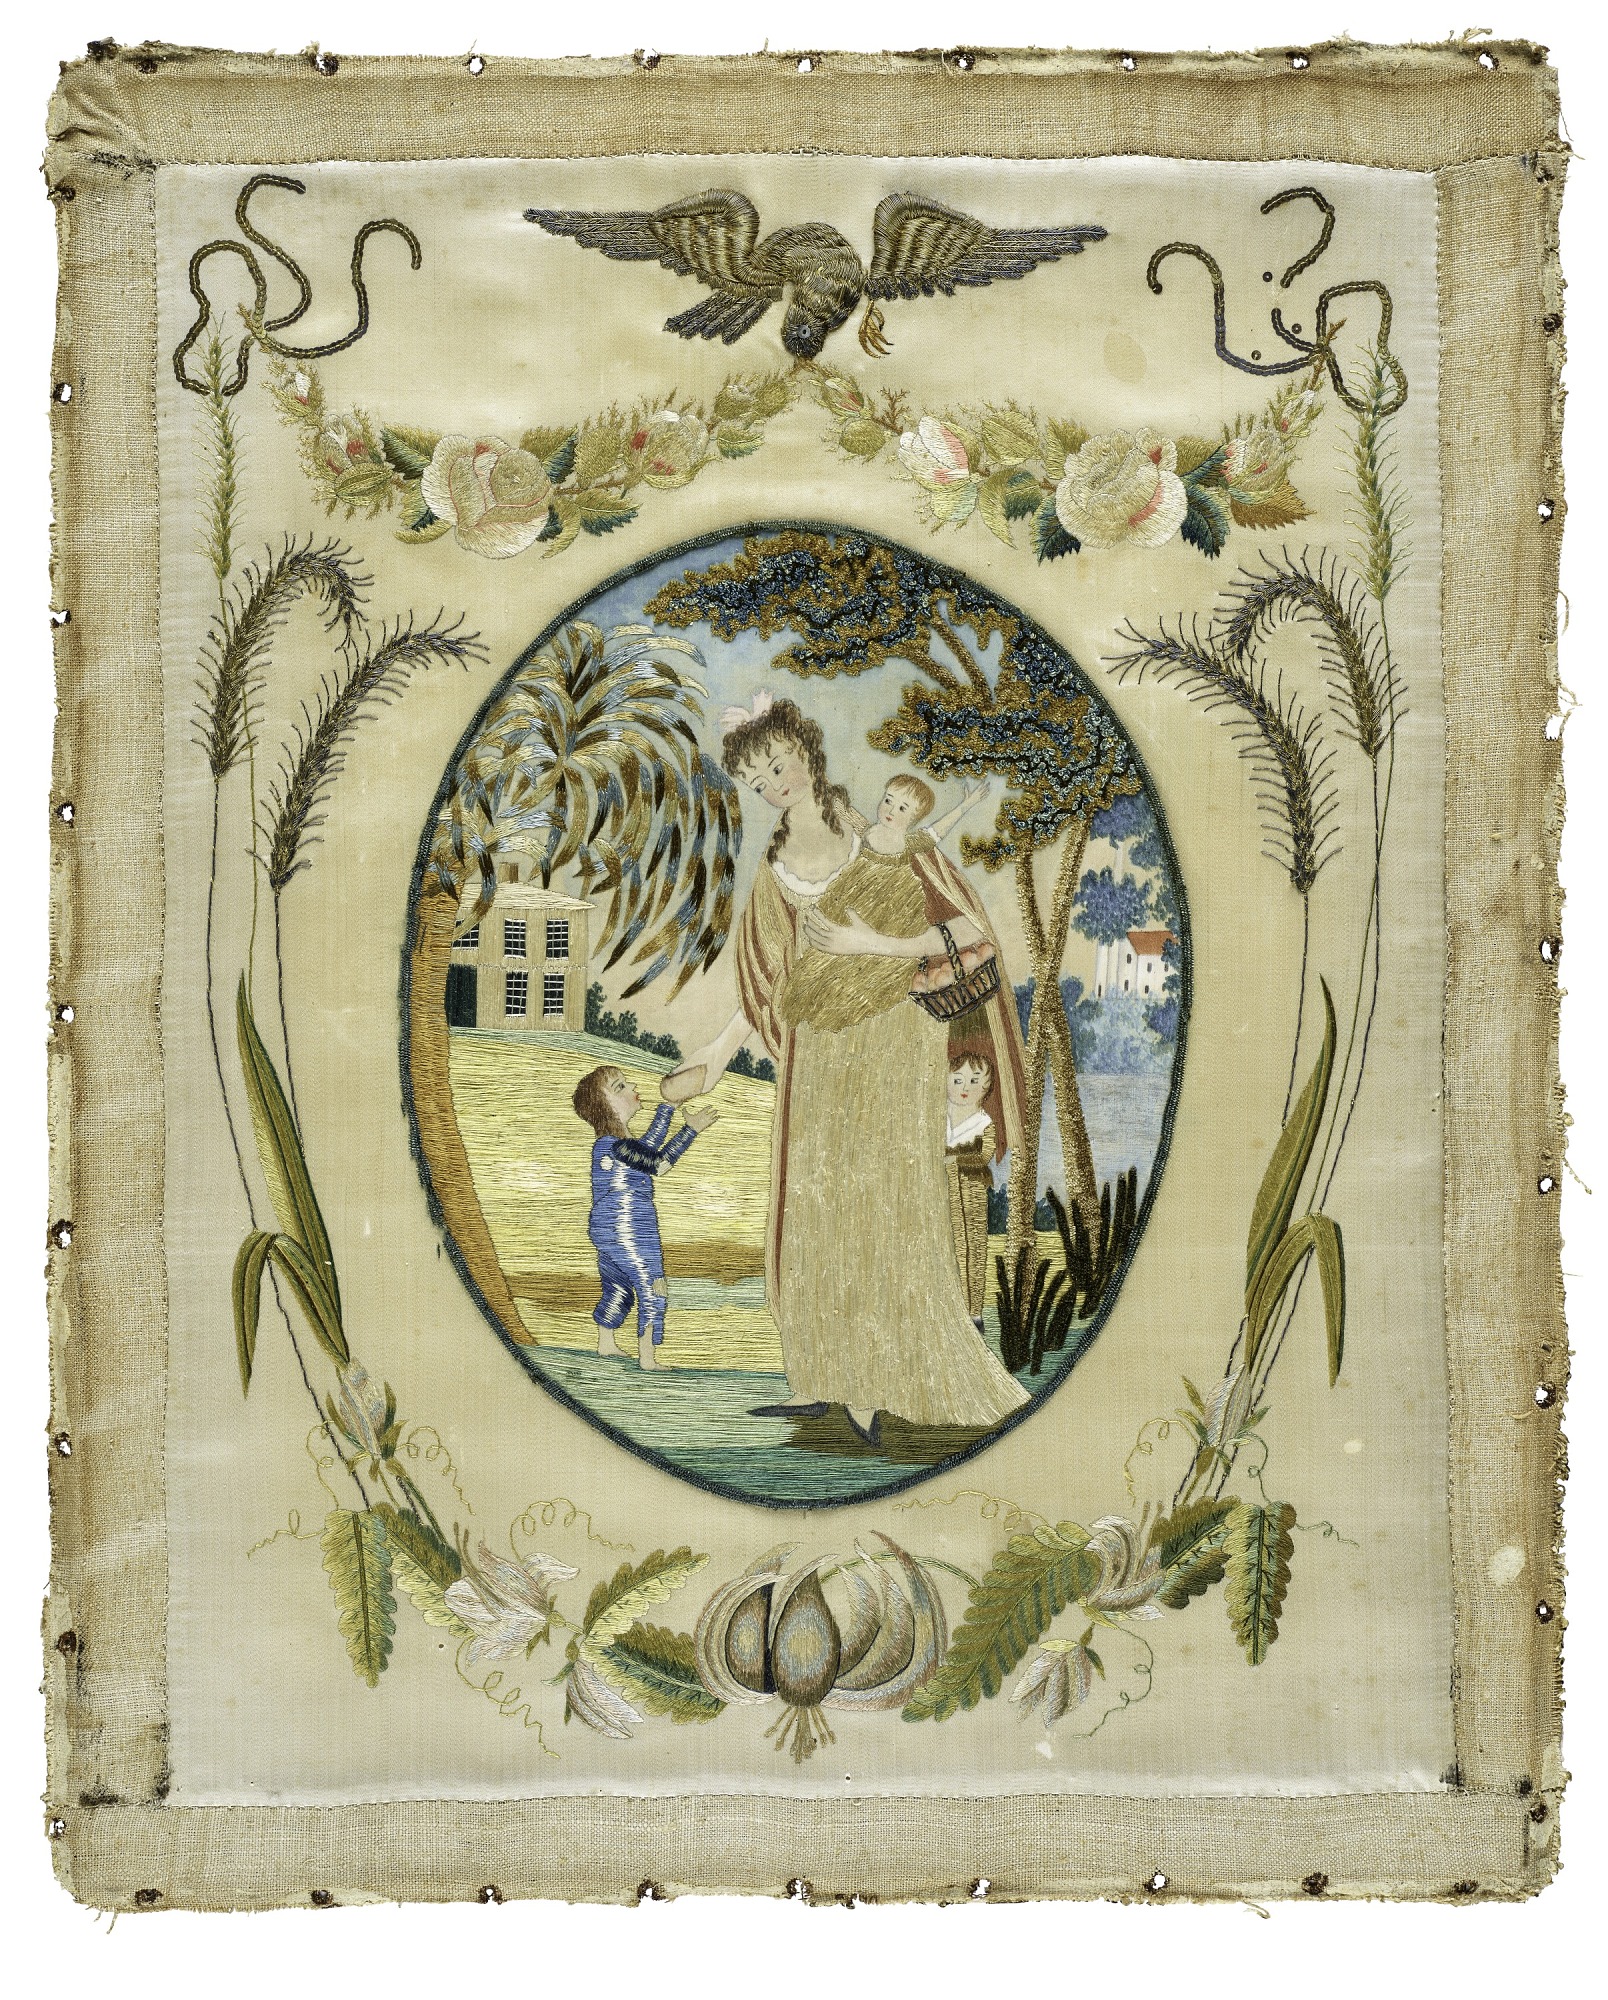 A 19th-century needlepoint, created by Rachel Breck, is the earliest example of food assistance in the National Museum of American History’s collections.